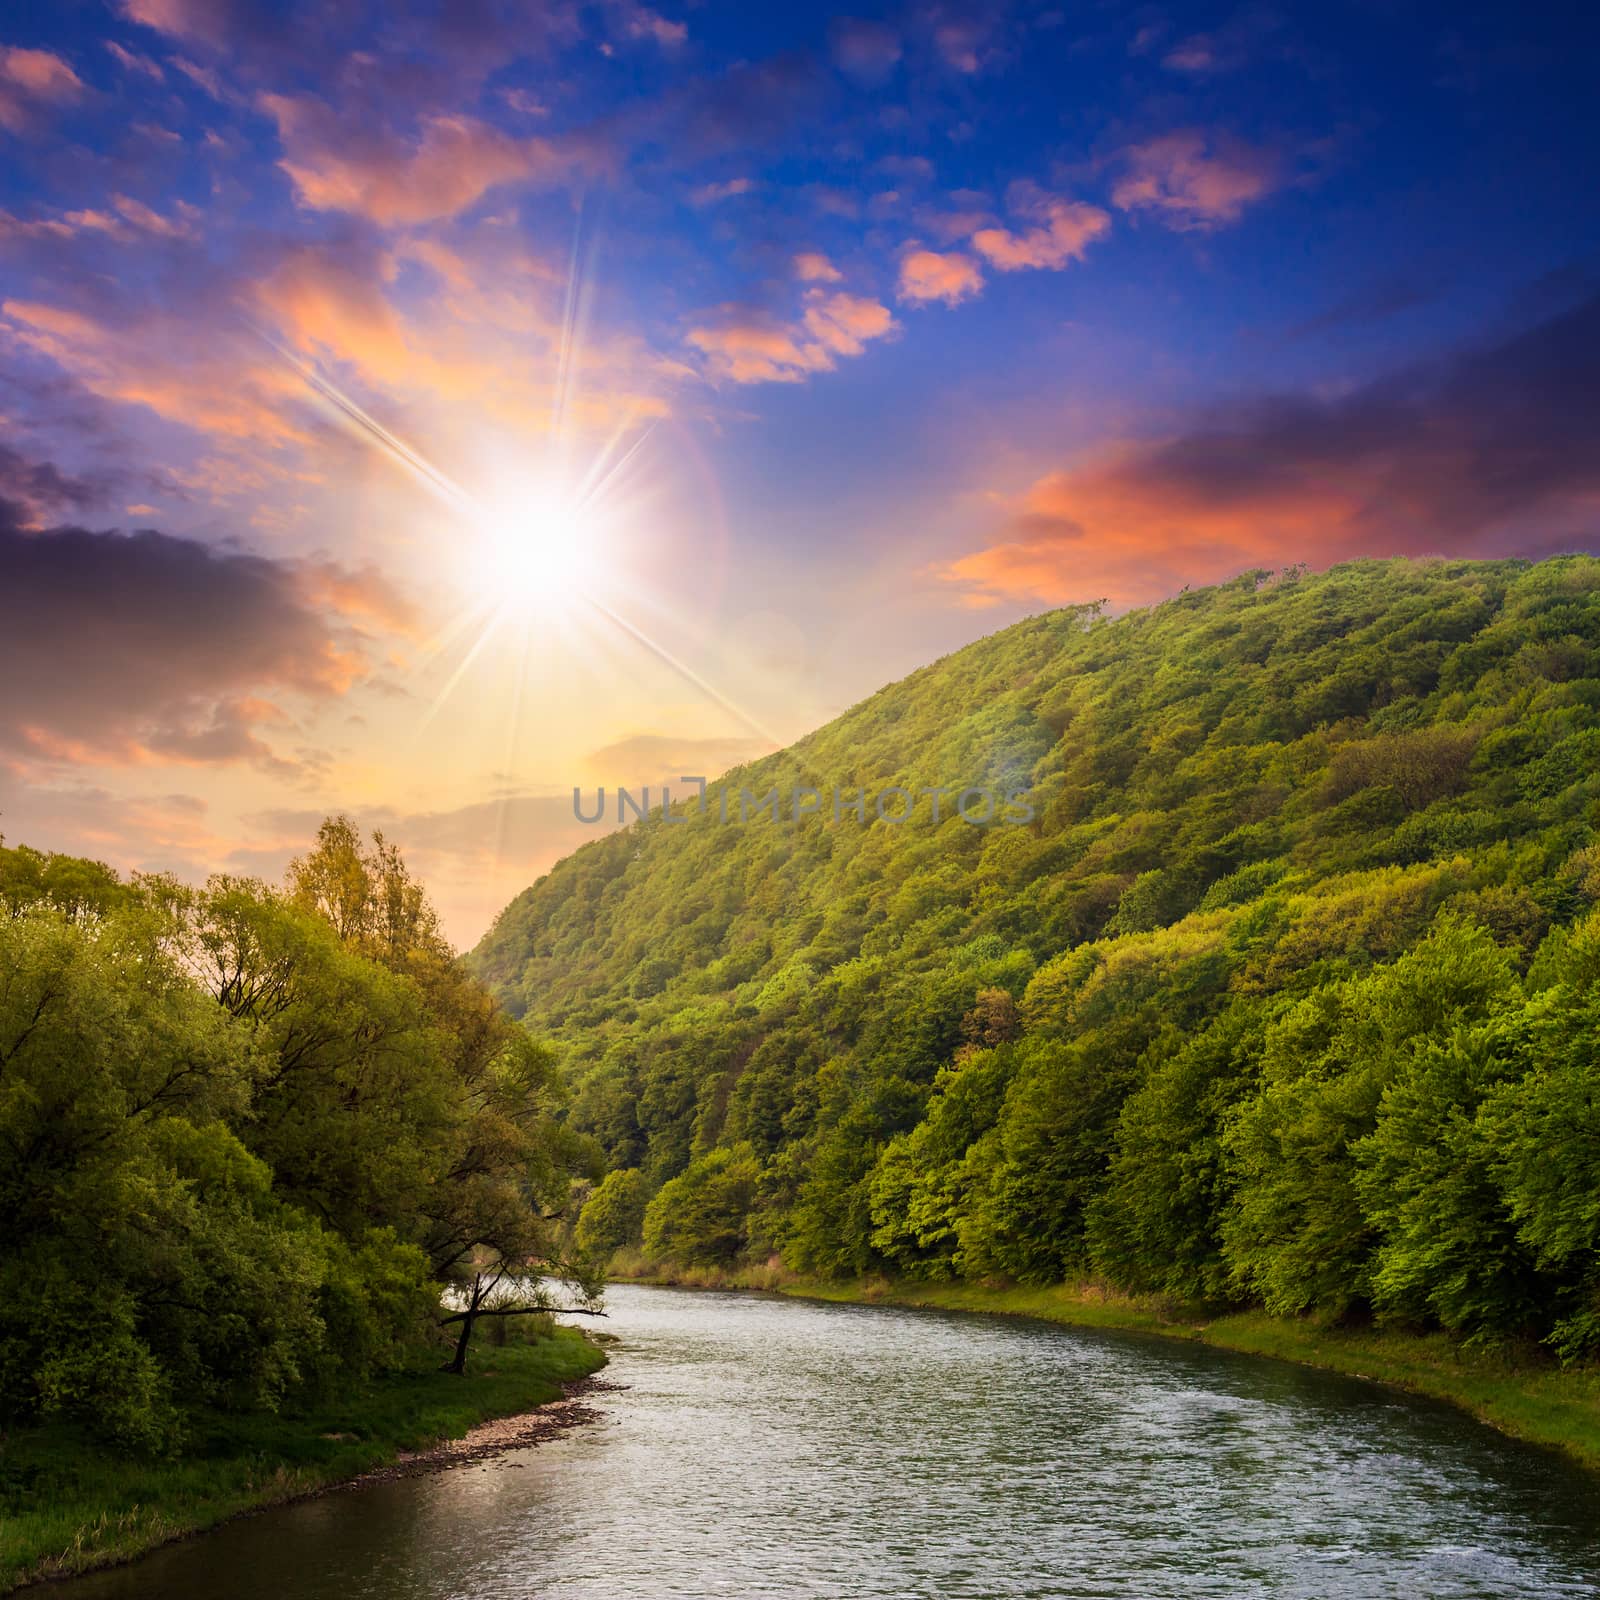 river flowing between green mountains through the forest at sunset